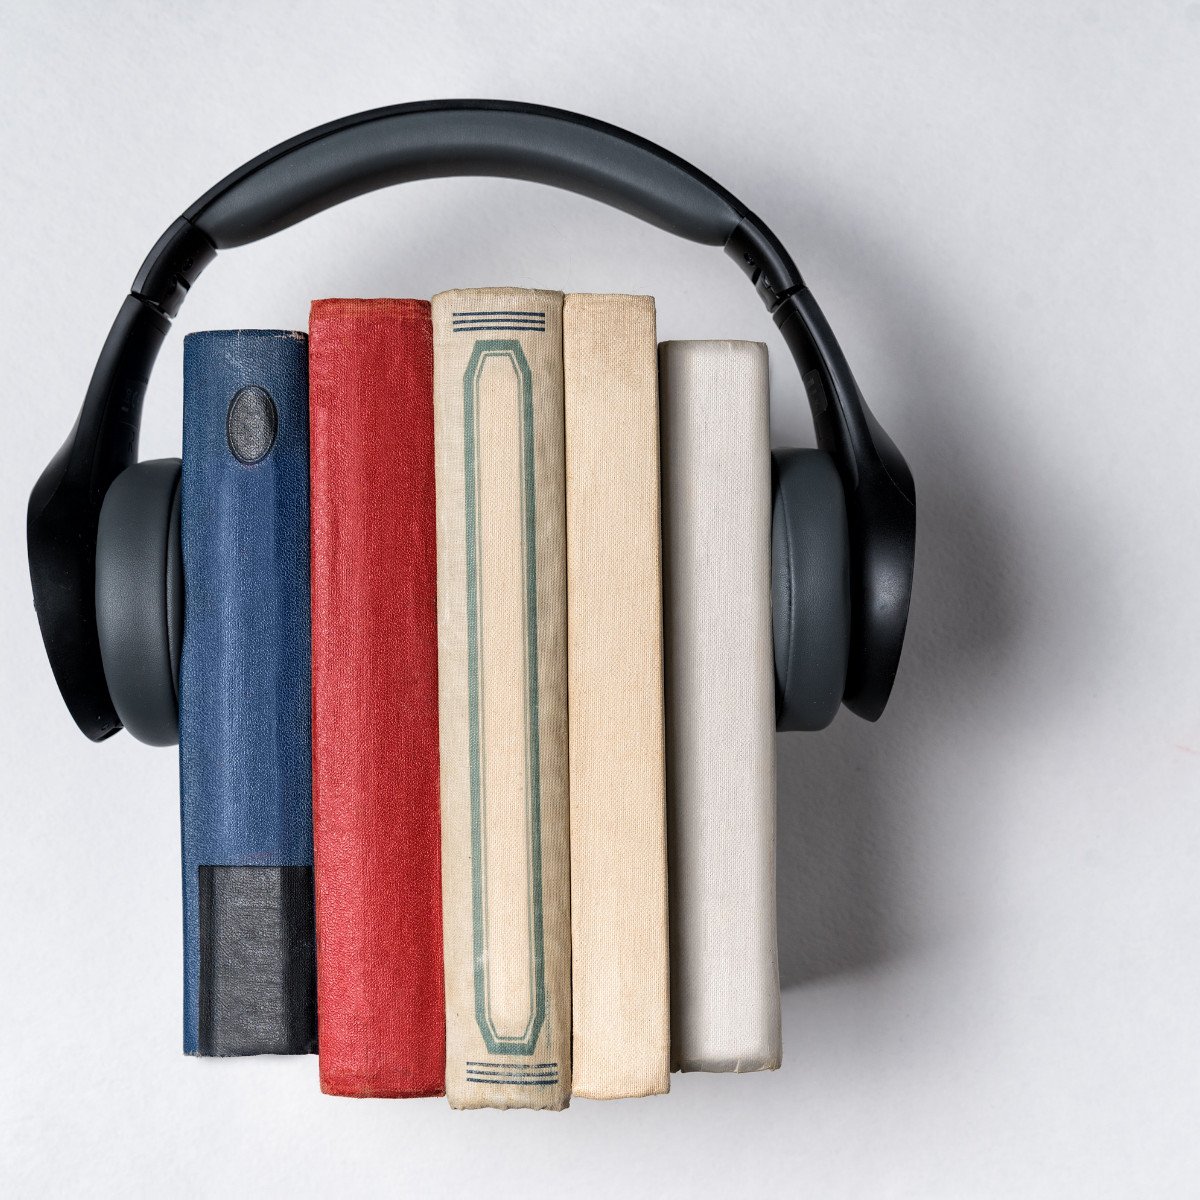 How Much Are Audio Books?